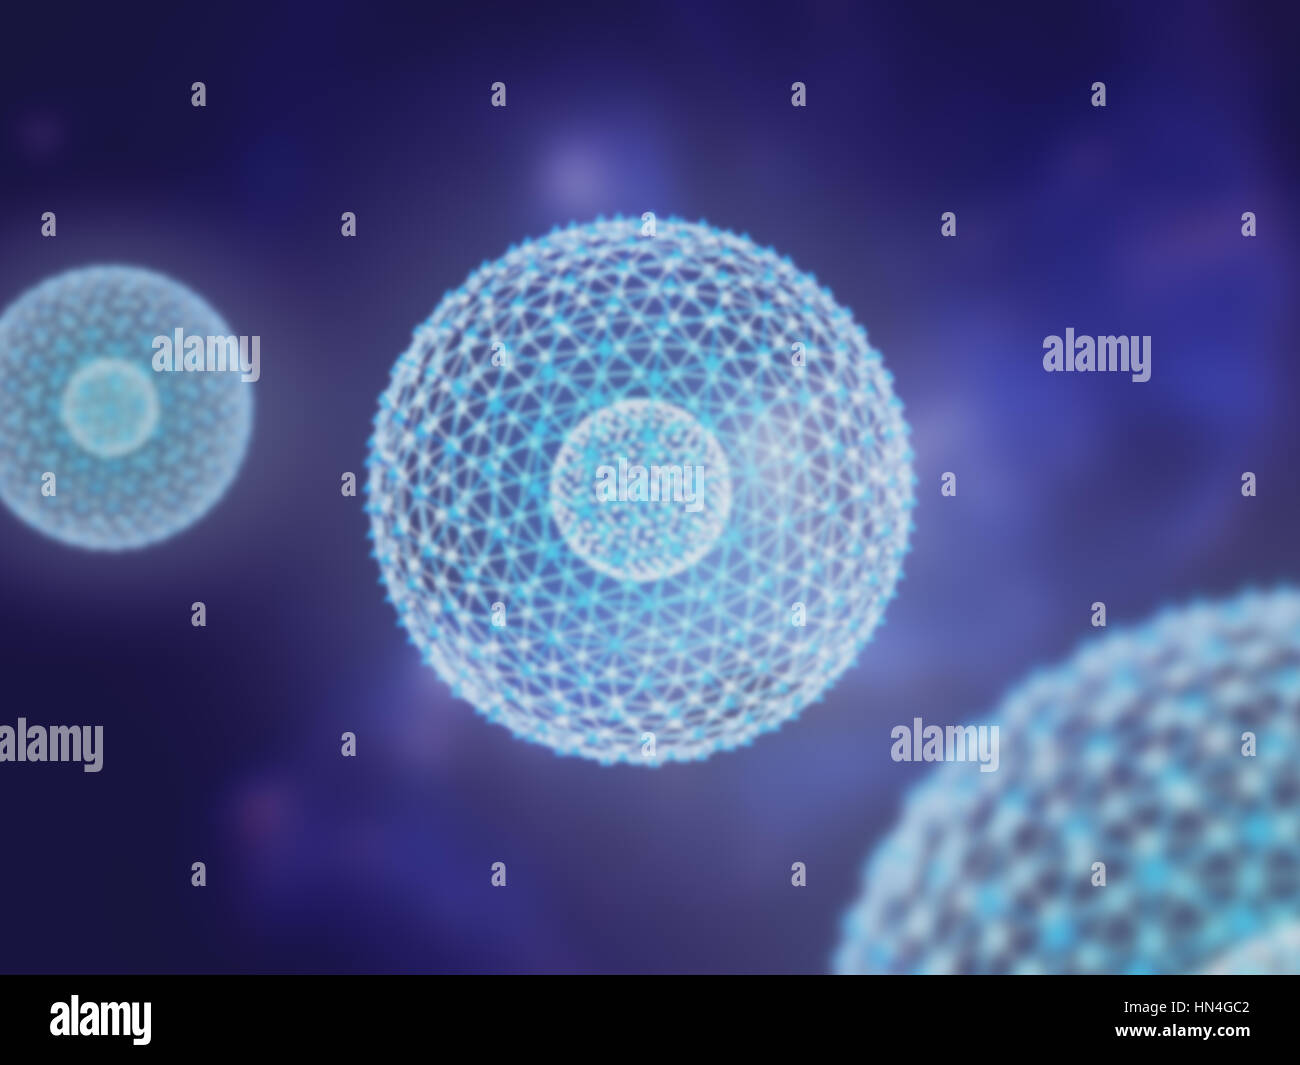 Nucleus of Atom Nuclear explode ray radiation light science 3D Illustration abstract blur background. Stock Photo